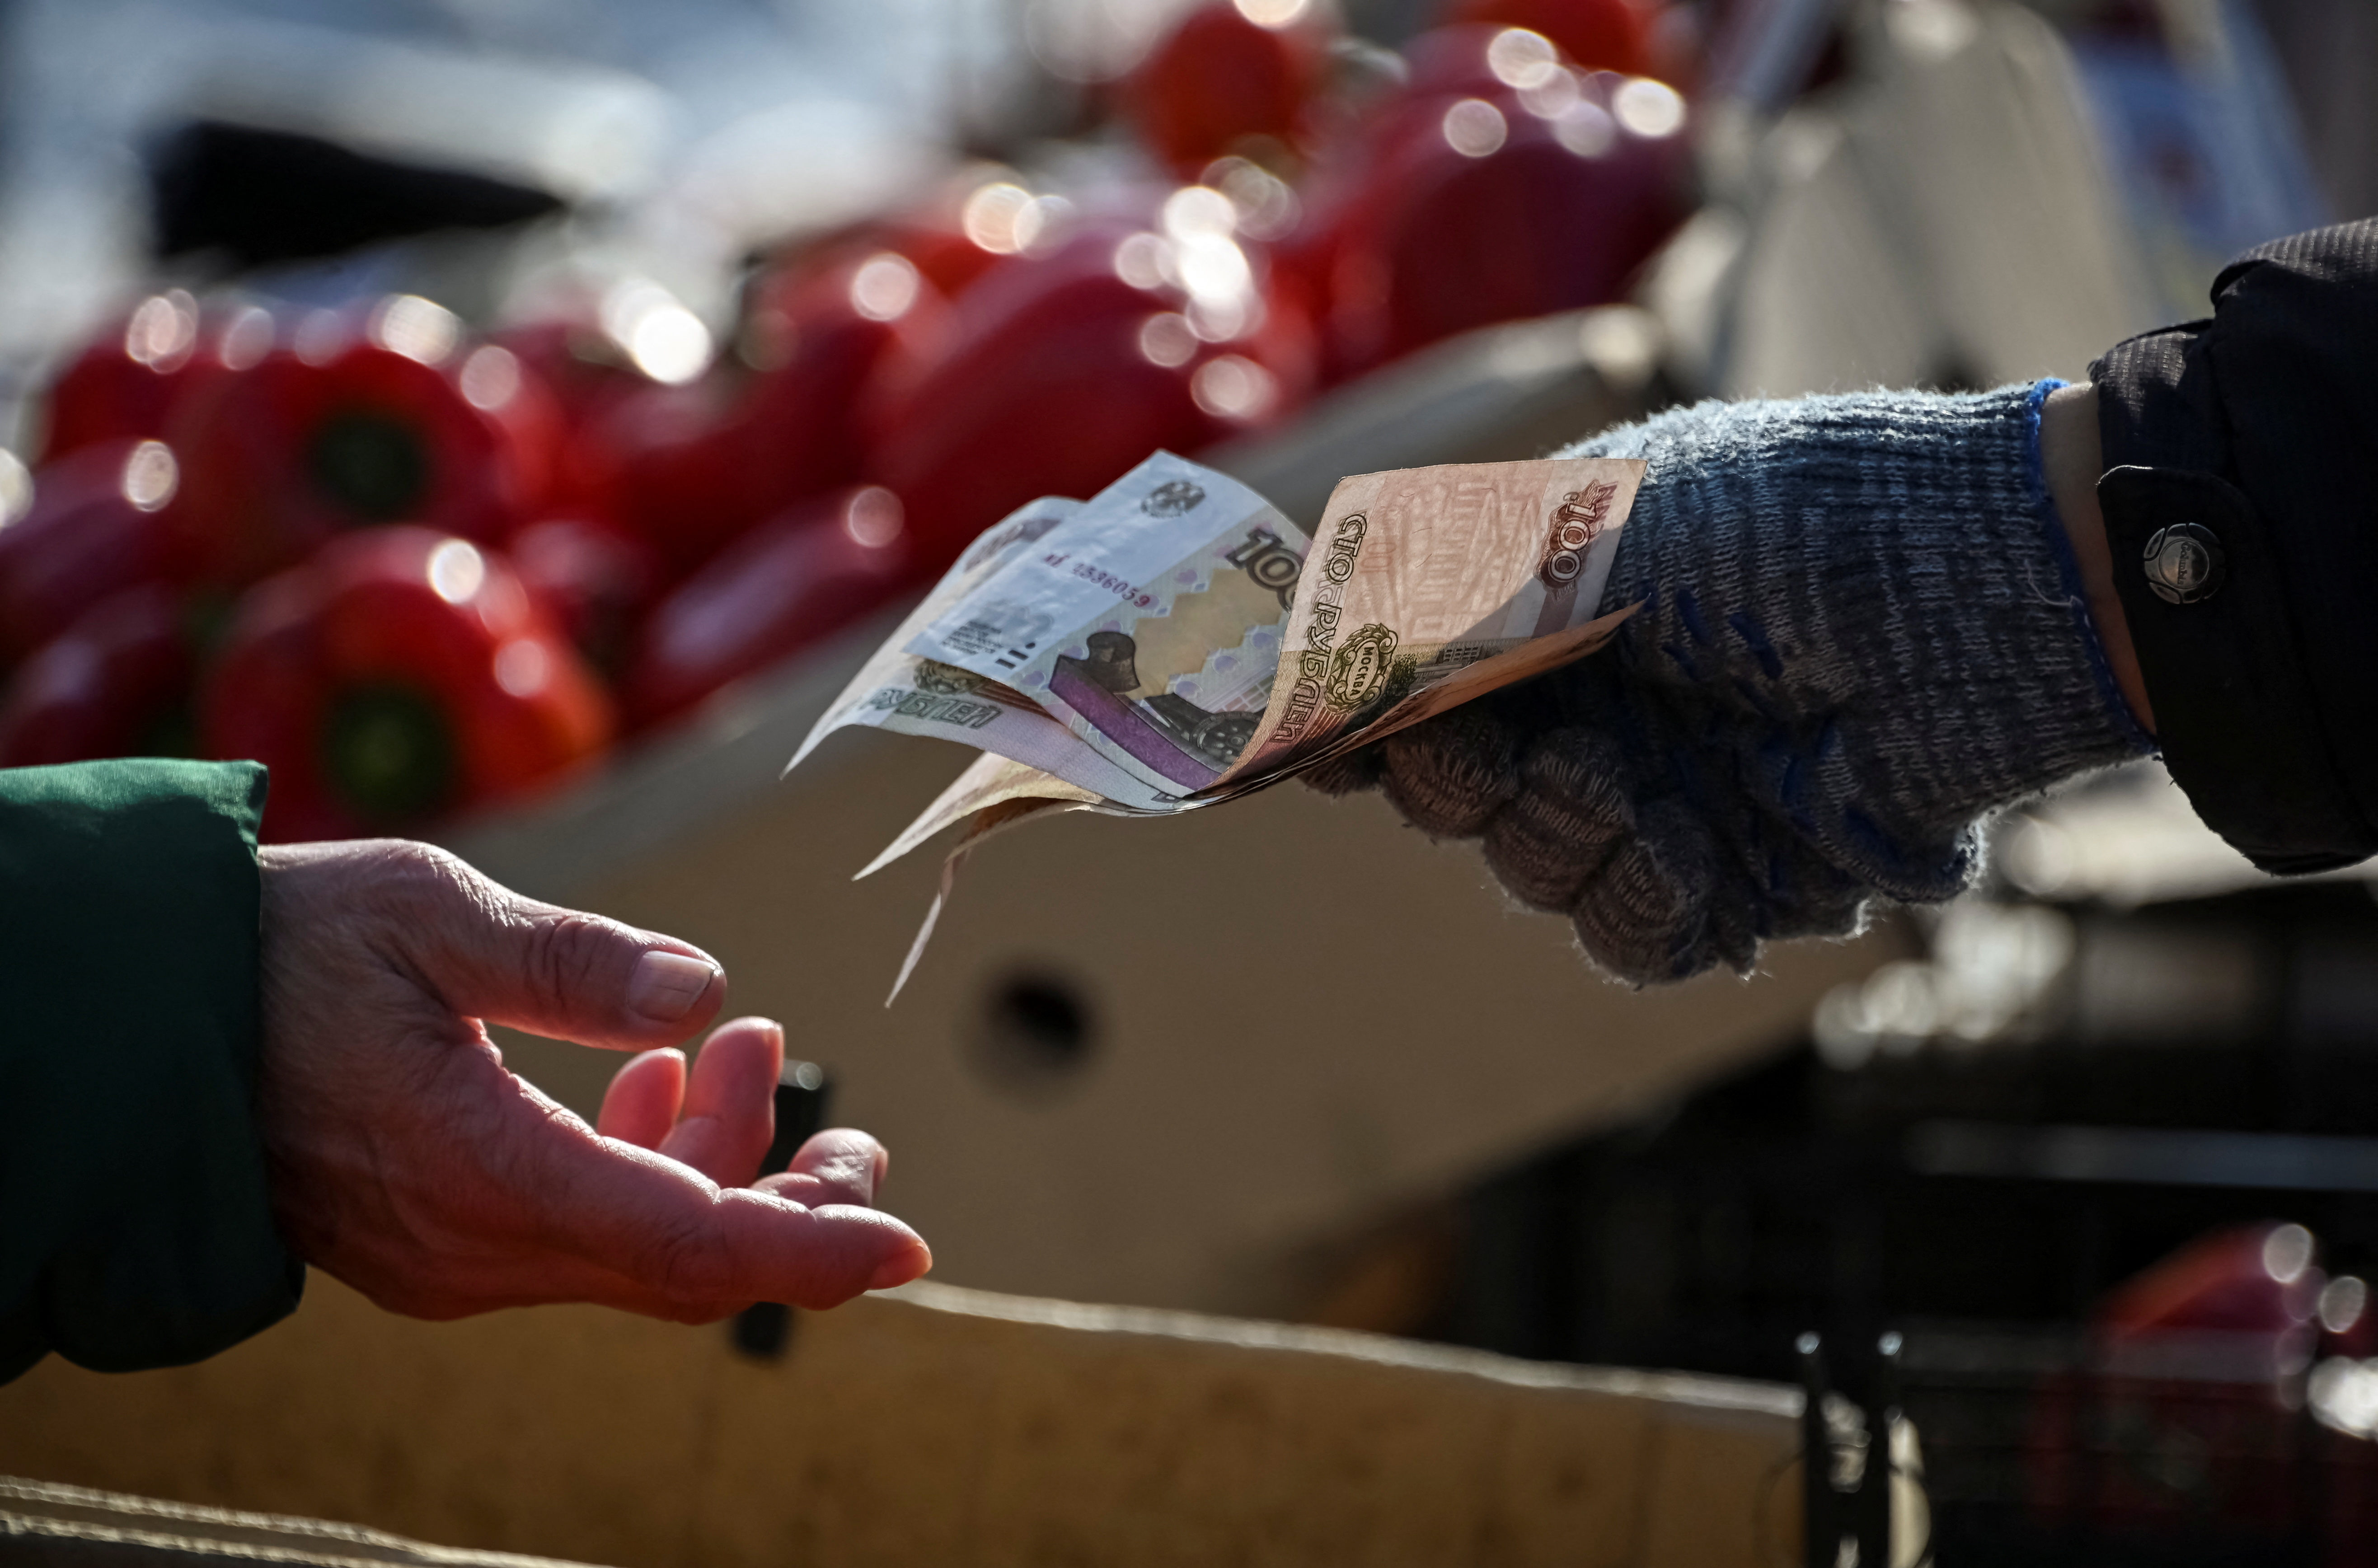 A vendor hands over Russian rouble banknotes to a customer at a street market in Omsk, Russia March 31, 2021. REUTERS/Alexey Malgavko